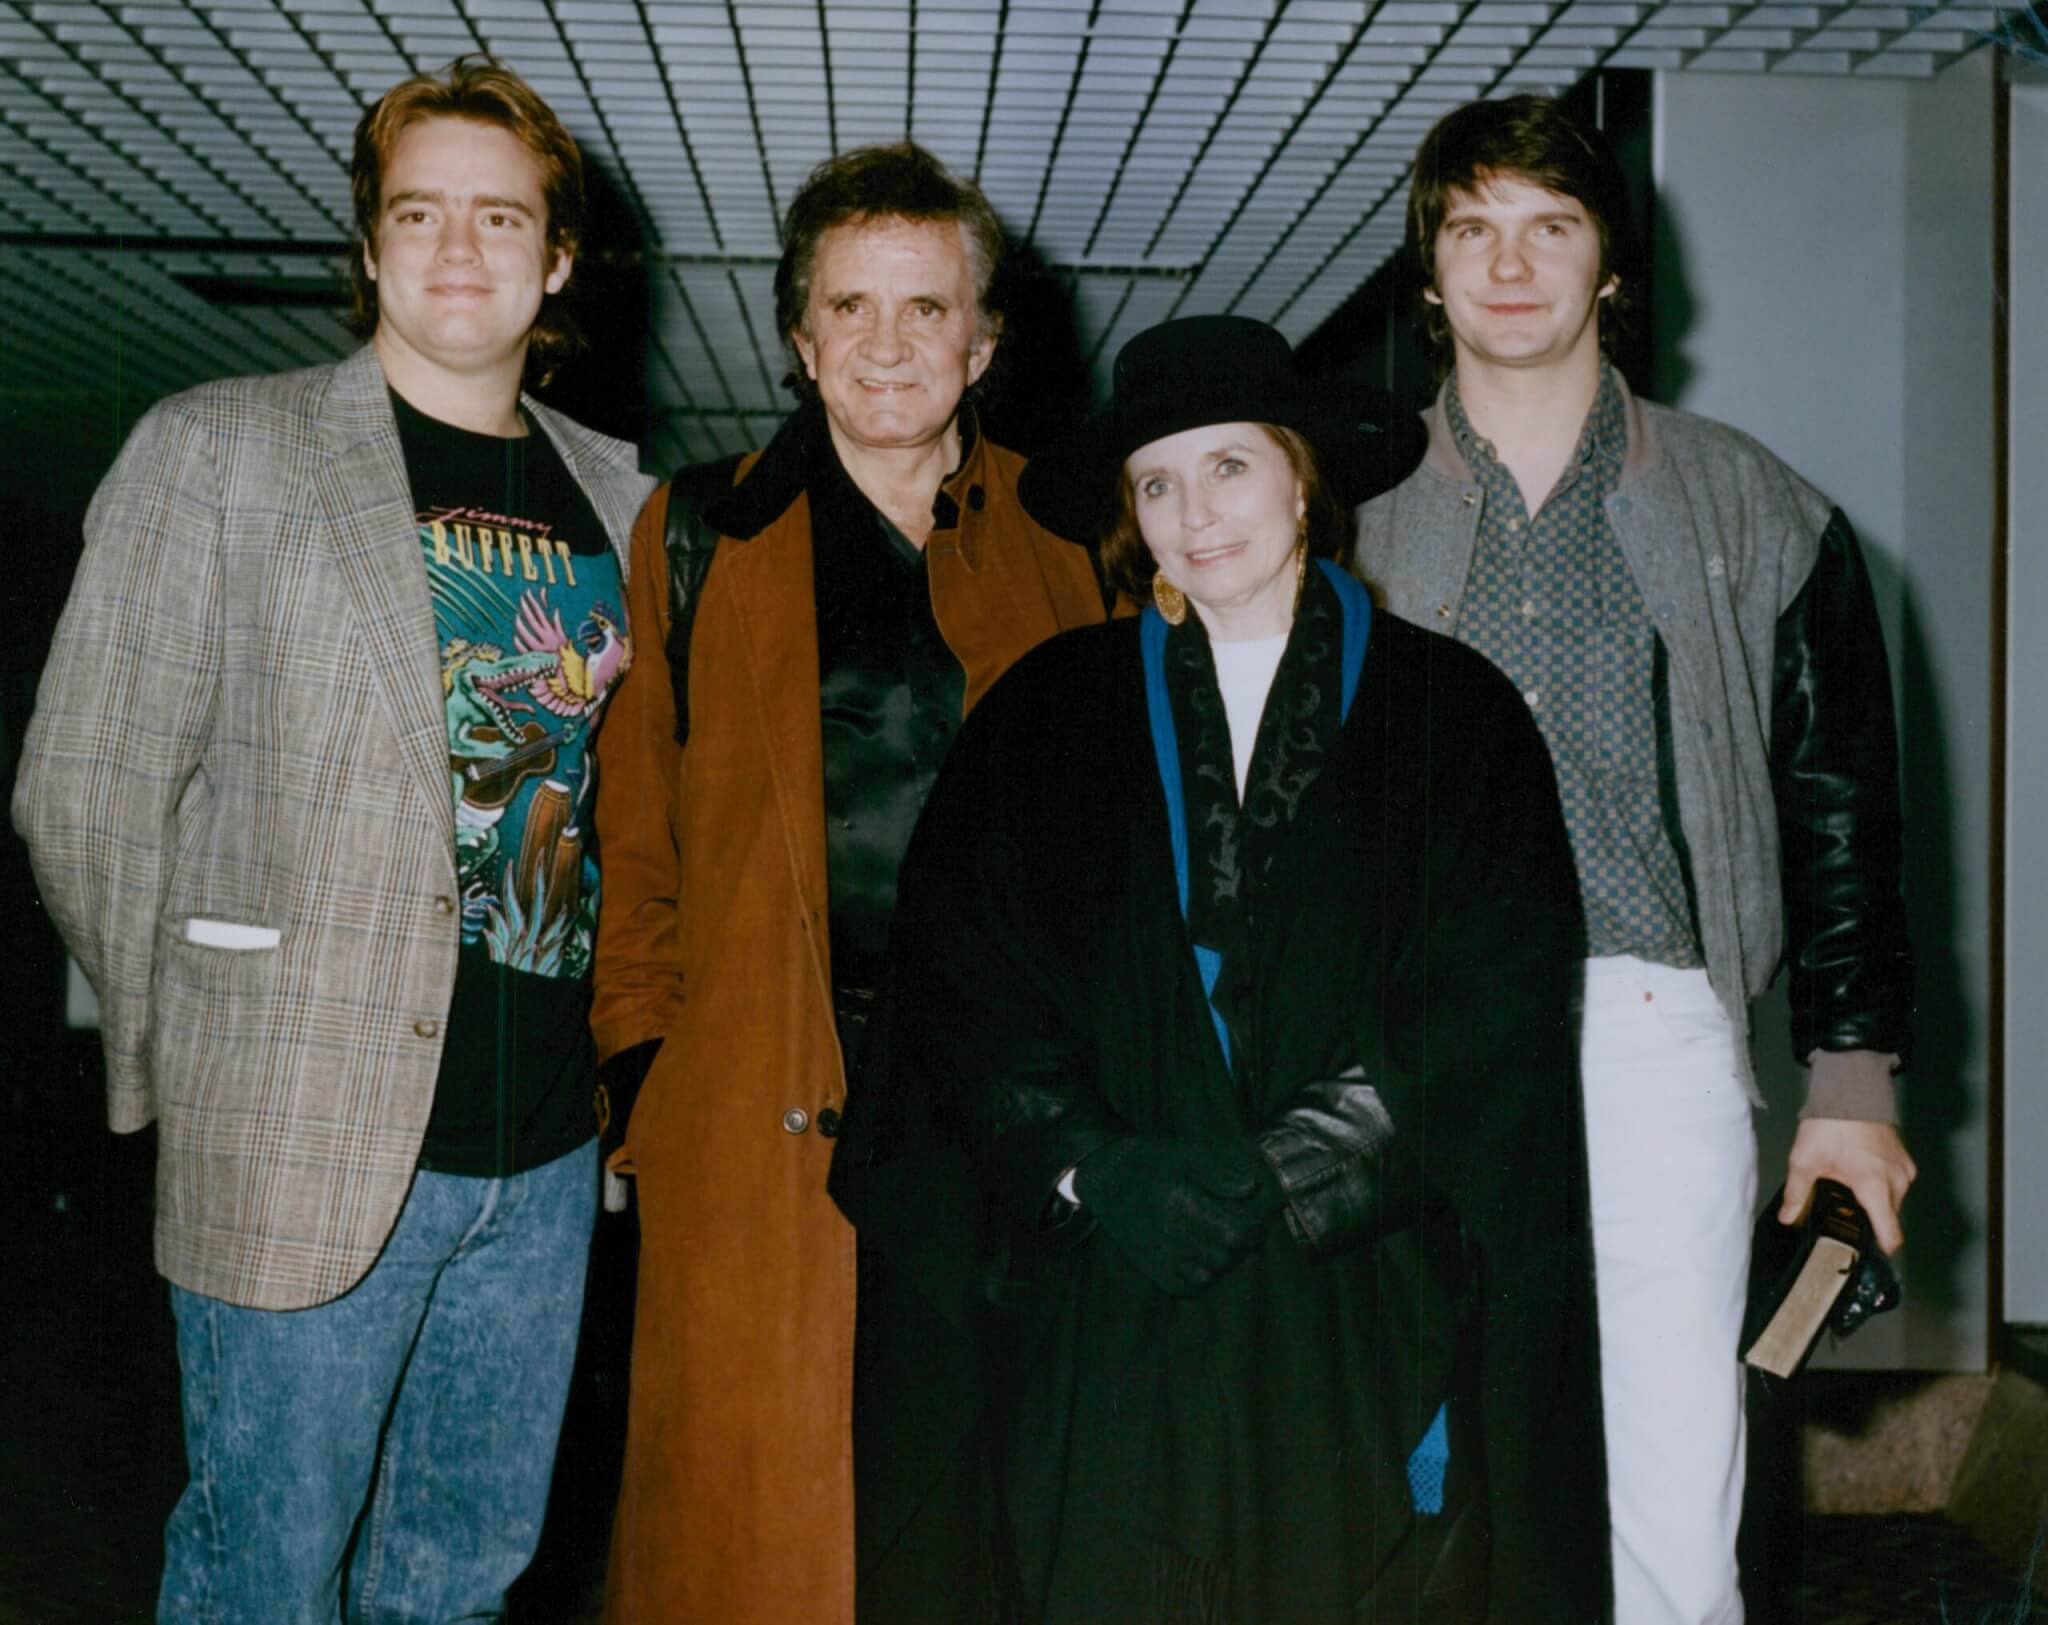 Singer Johnny Cash And Wife June Arriving At Heathrow Airport Today With Their Son John Carter (left) And Wesley Orbison (right) Son Of Singer Roy Orbison. Box 741 1121031737 A.jpg.